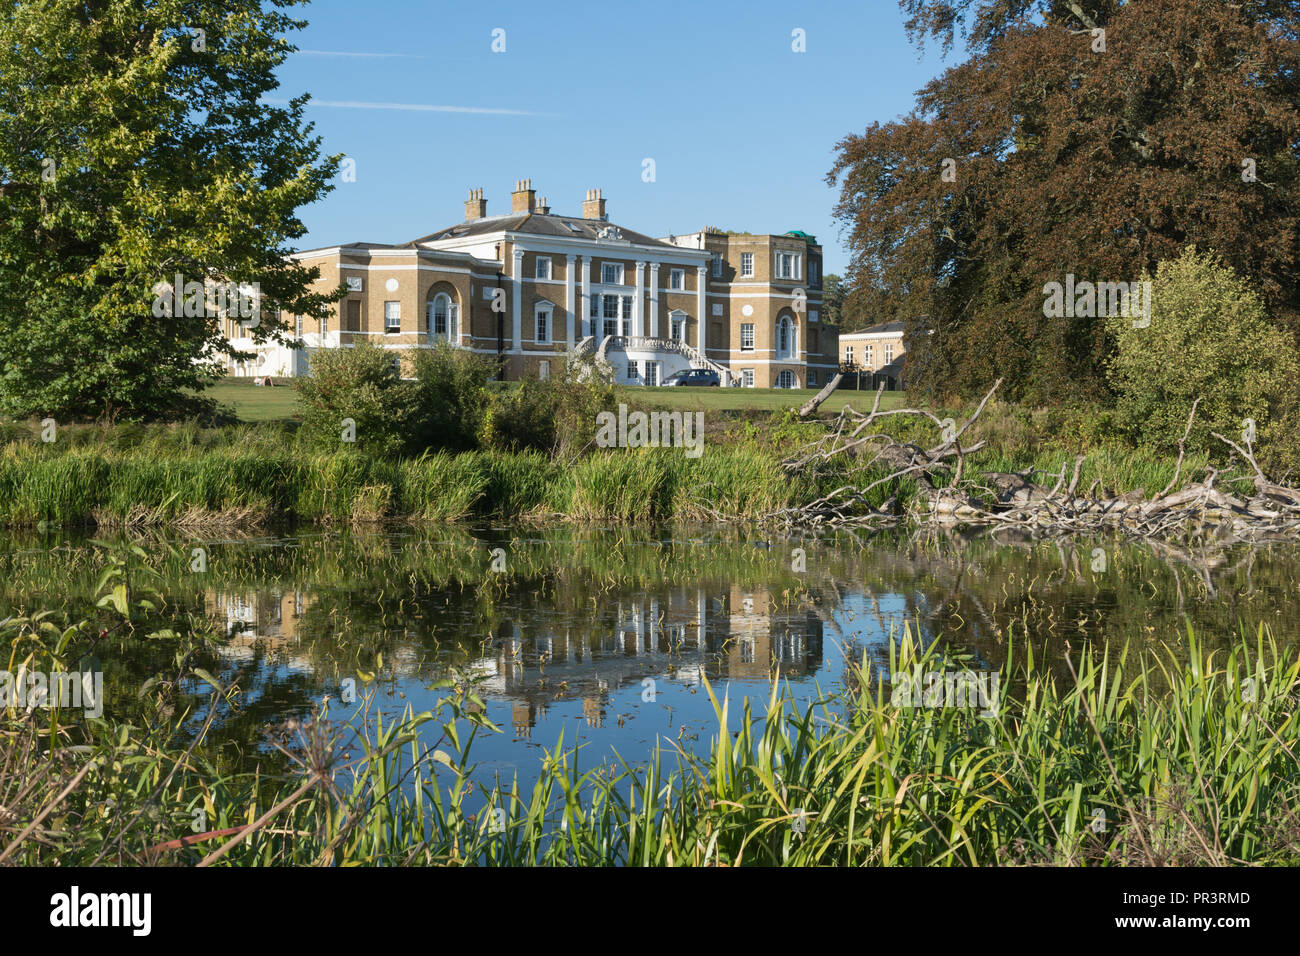 Waverley Abbey House, a charming Grade II listed Georgian mansion, reflected in the lake, among mature trees in autumn, Surrey, UK Stock Photo